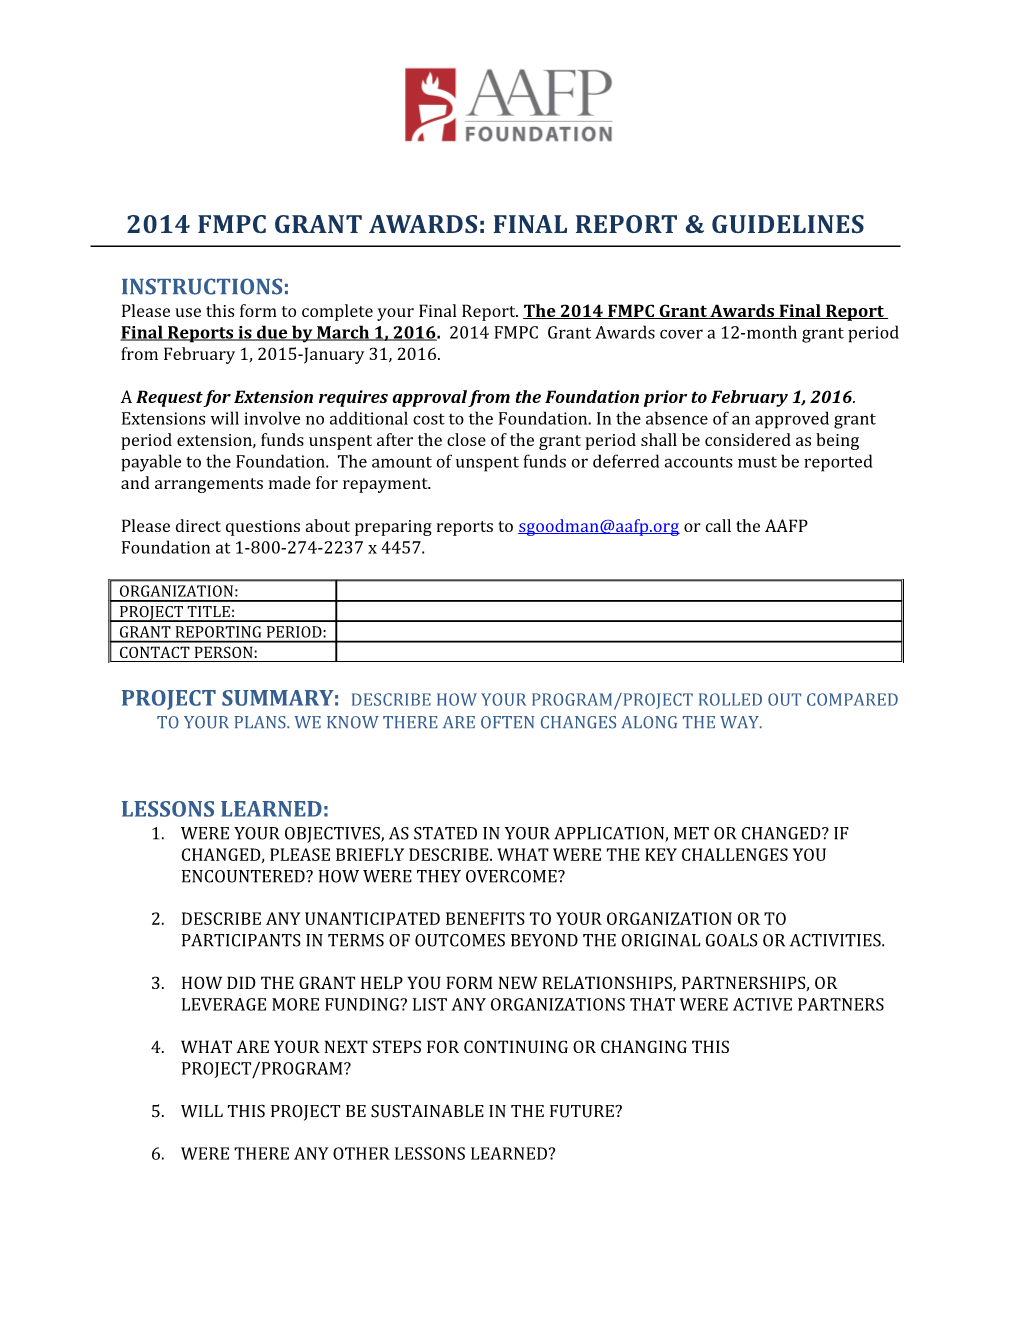 2014 Fmpc Grant Awards: Final Report & Guidelines